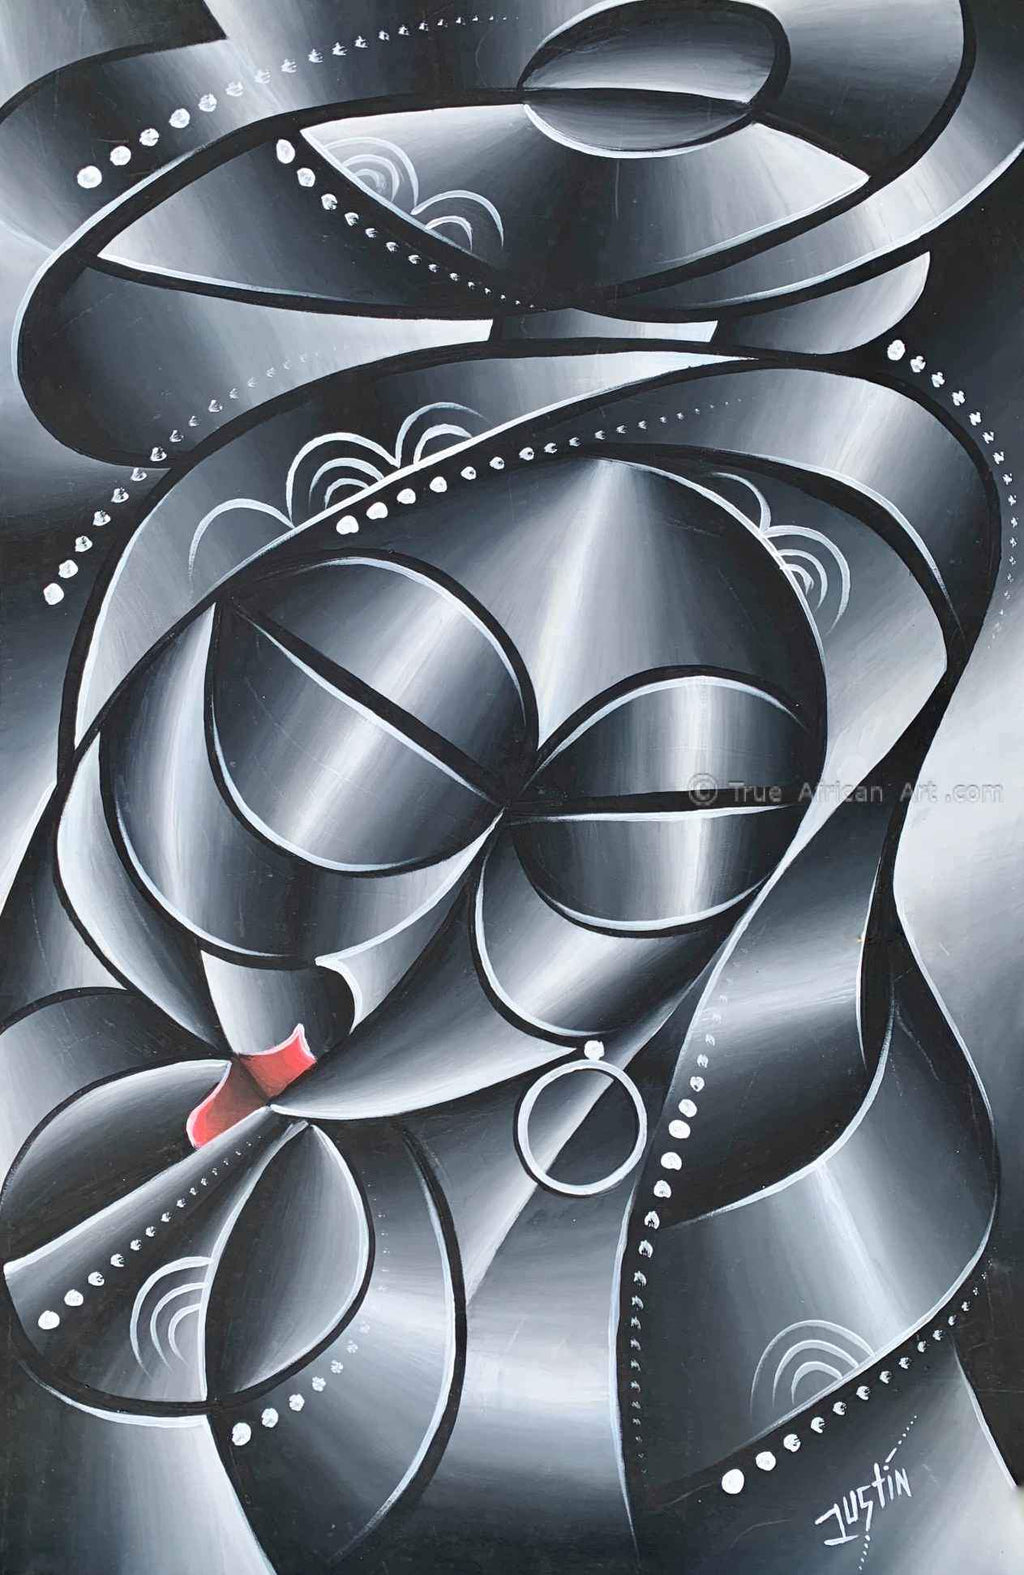 Justin Laryea  |  Ghana  |  "A Kiss without Color"  |  True African Art .com